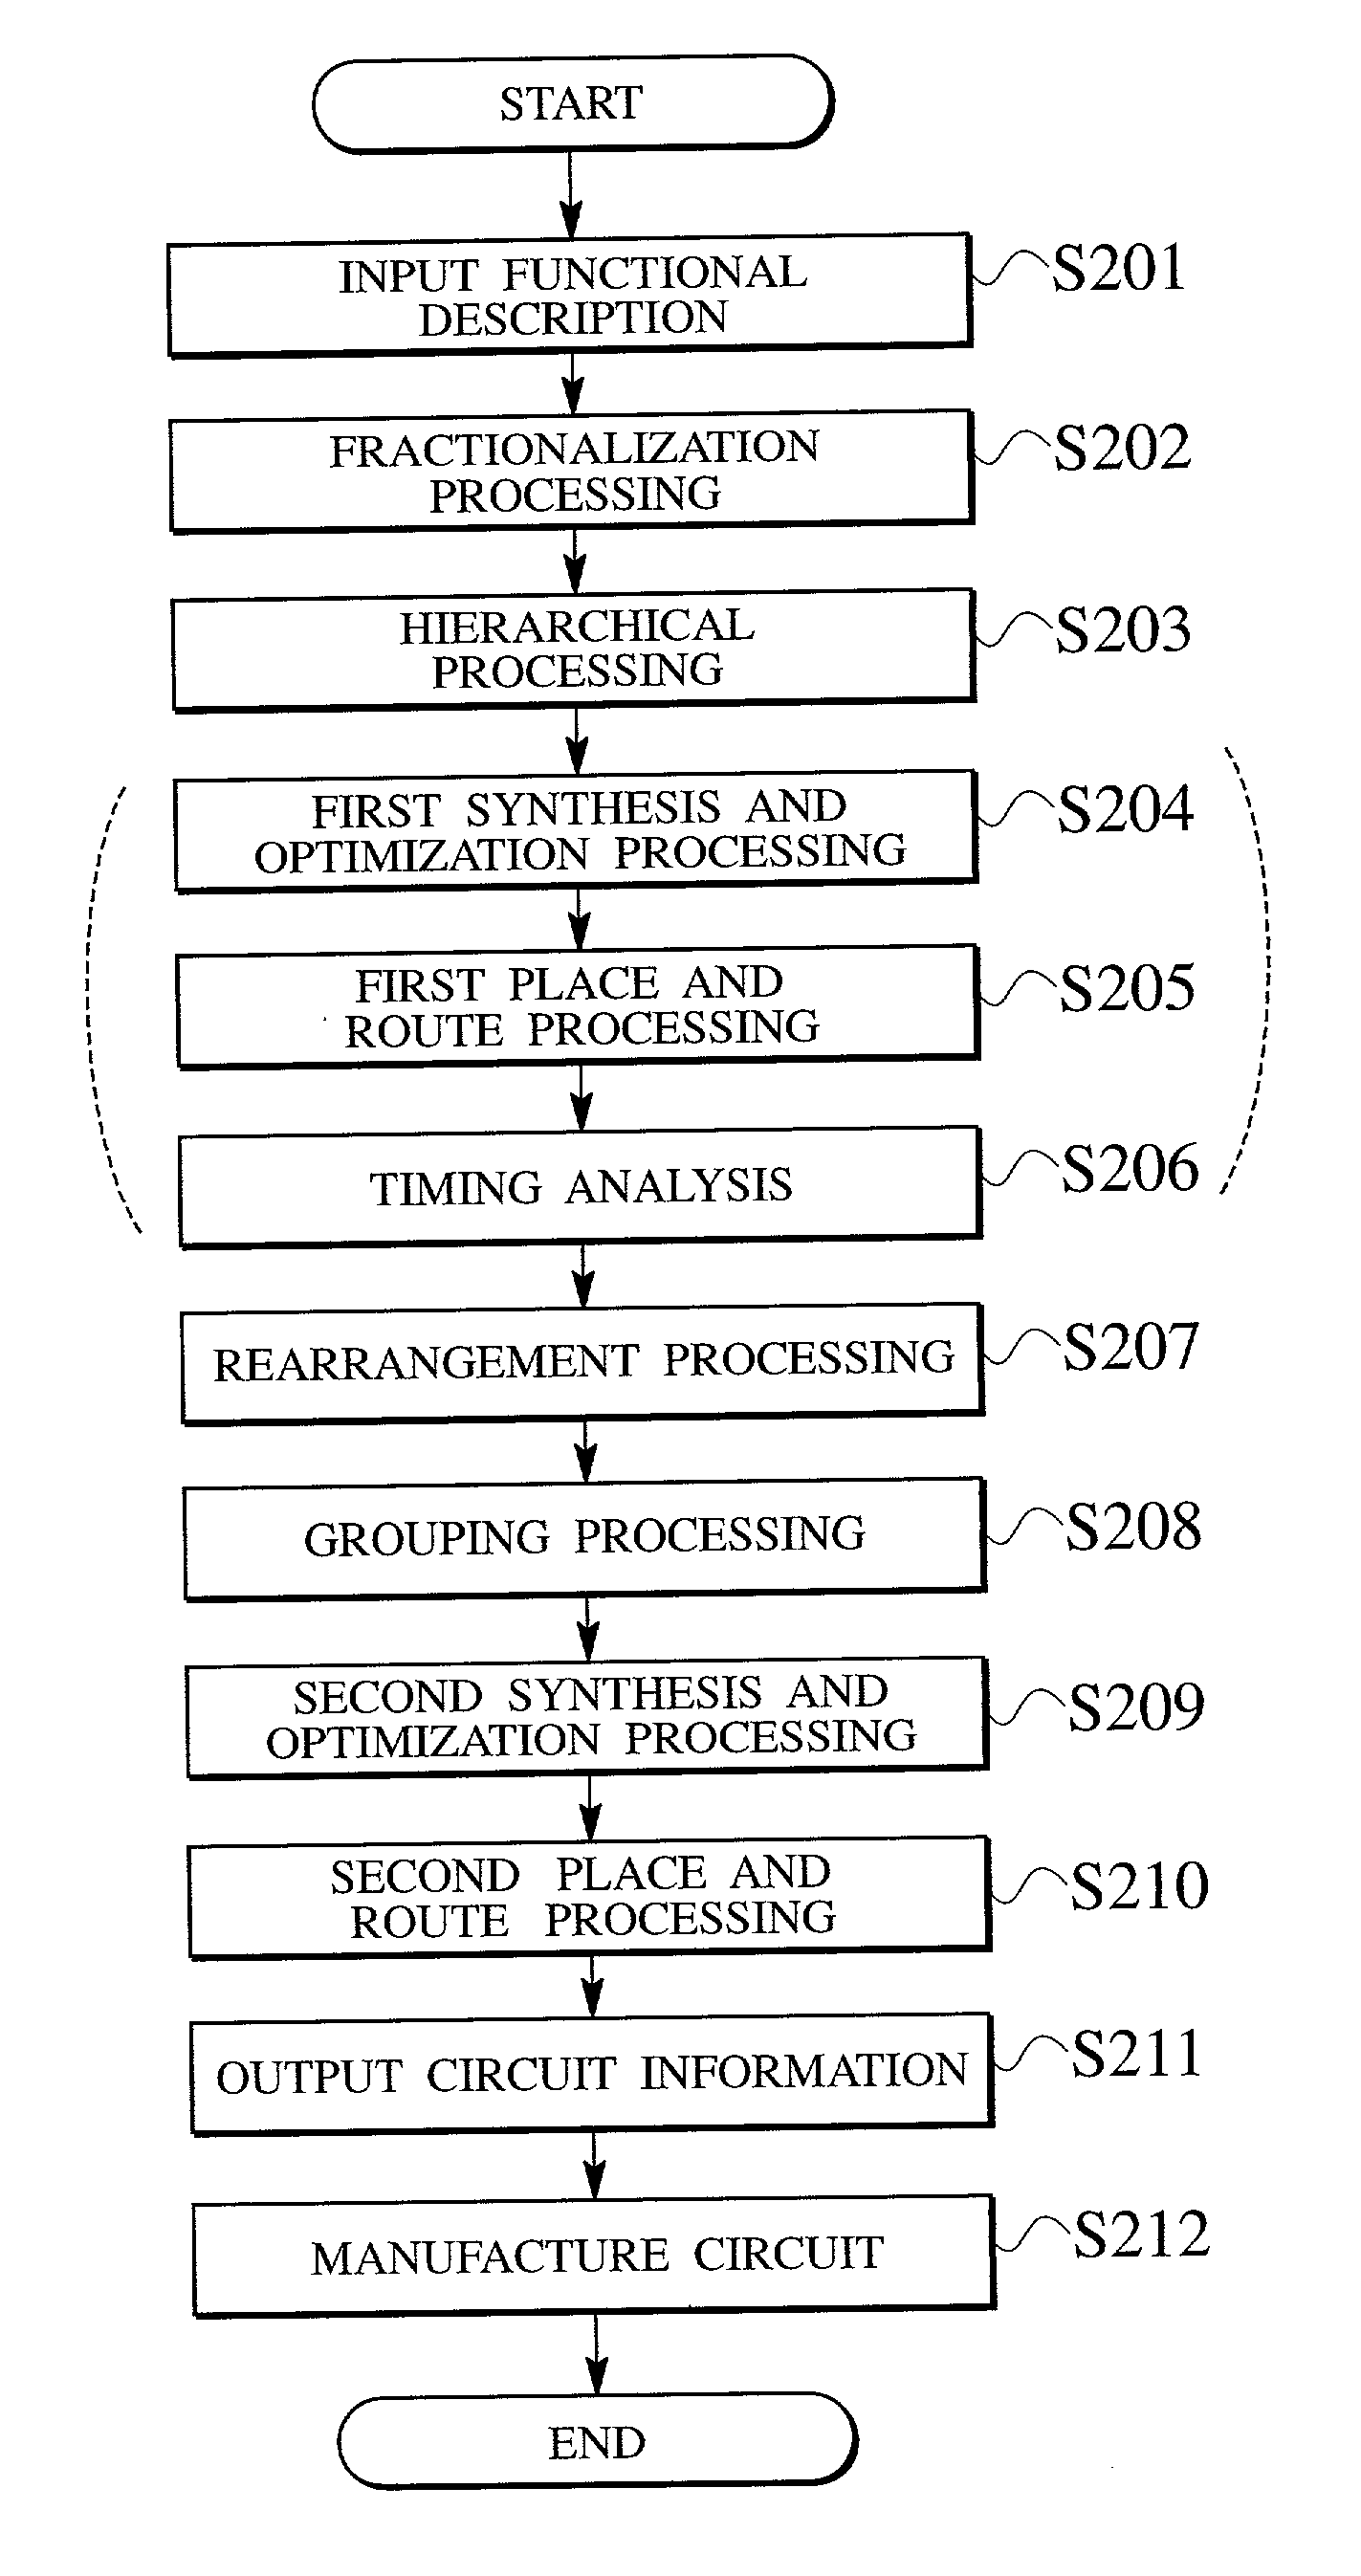 Logical synthesizing apparatus for converting a hardware functional description into gate-level circuit information